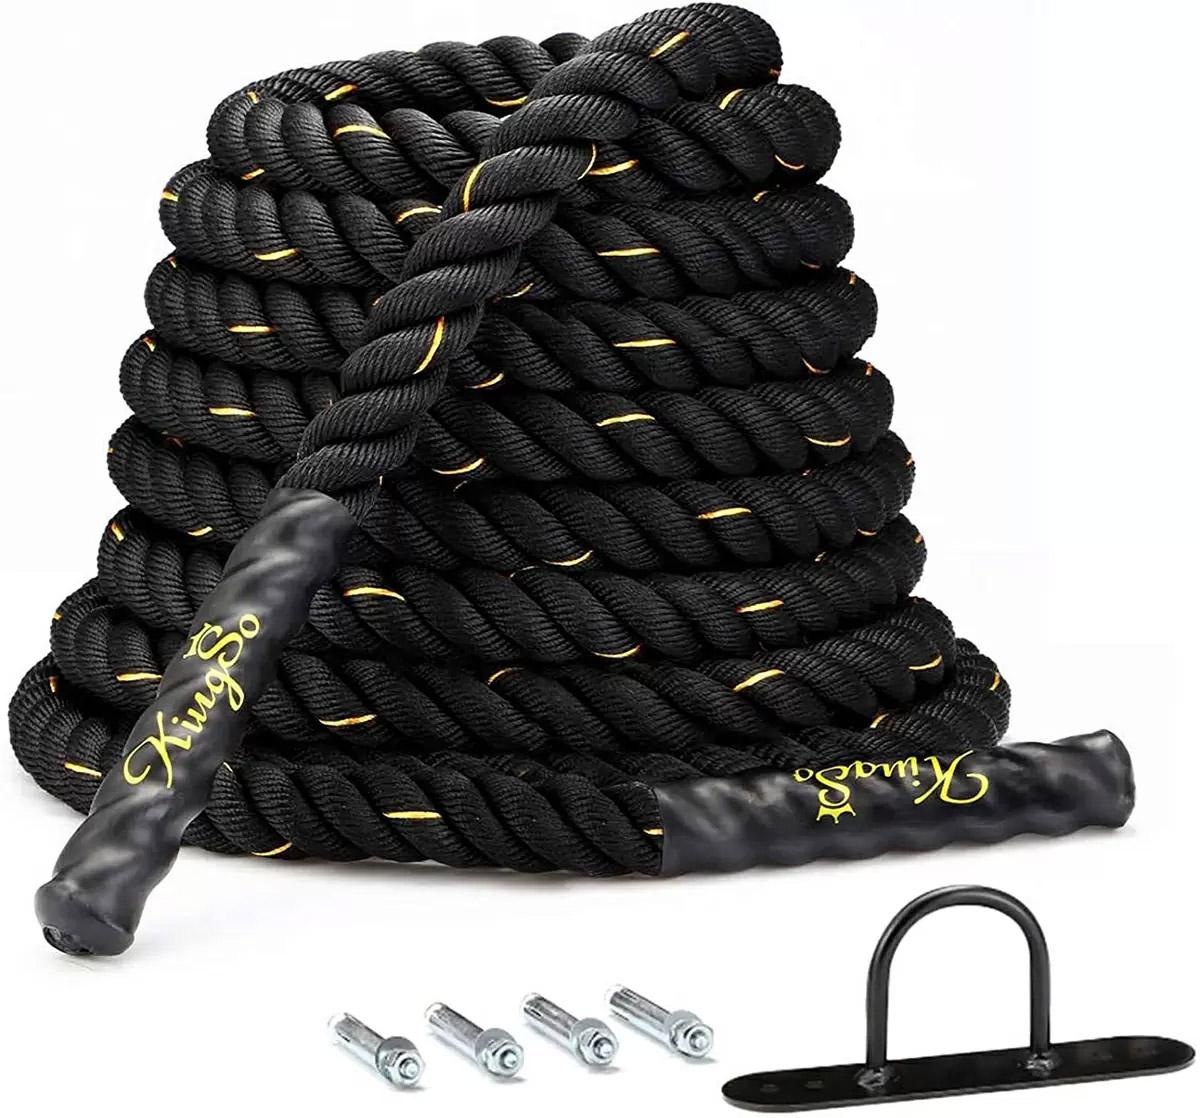 30ft KingSO Dacron Workout Battle Rope for $34.97 Shipped